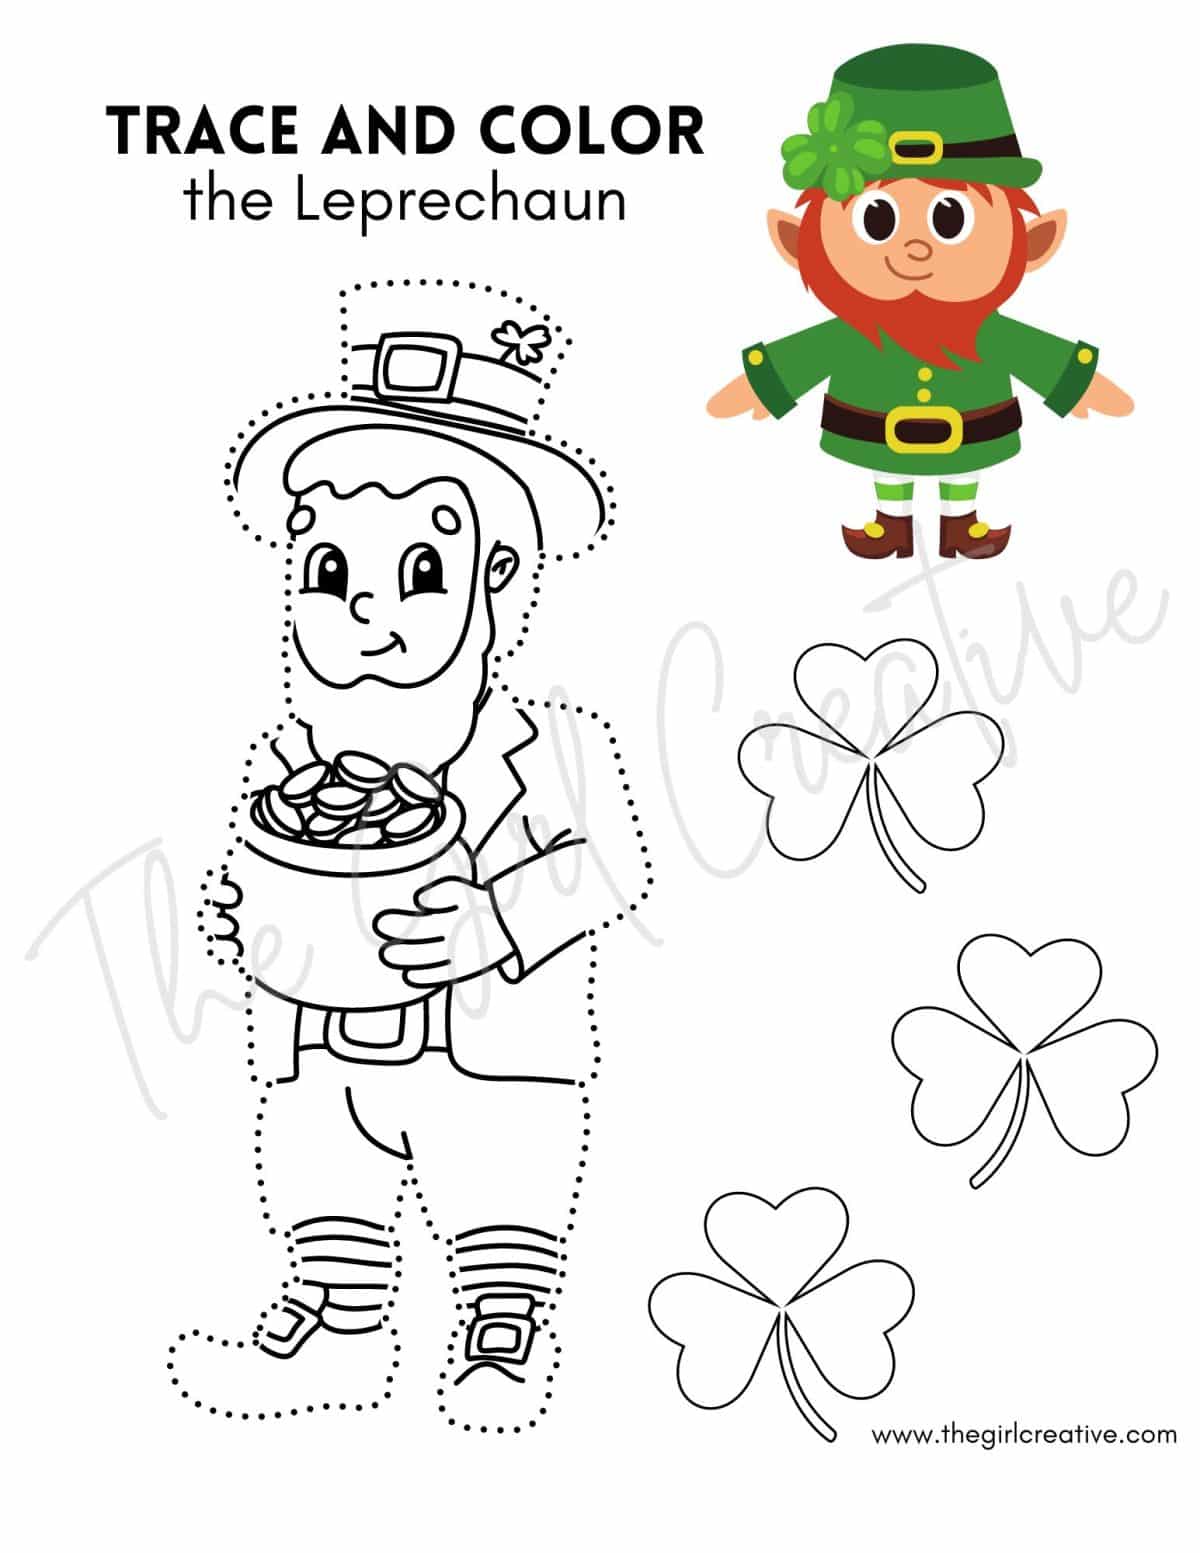 Leprechaun coloring page for St. Patrick's Day